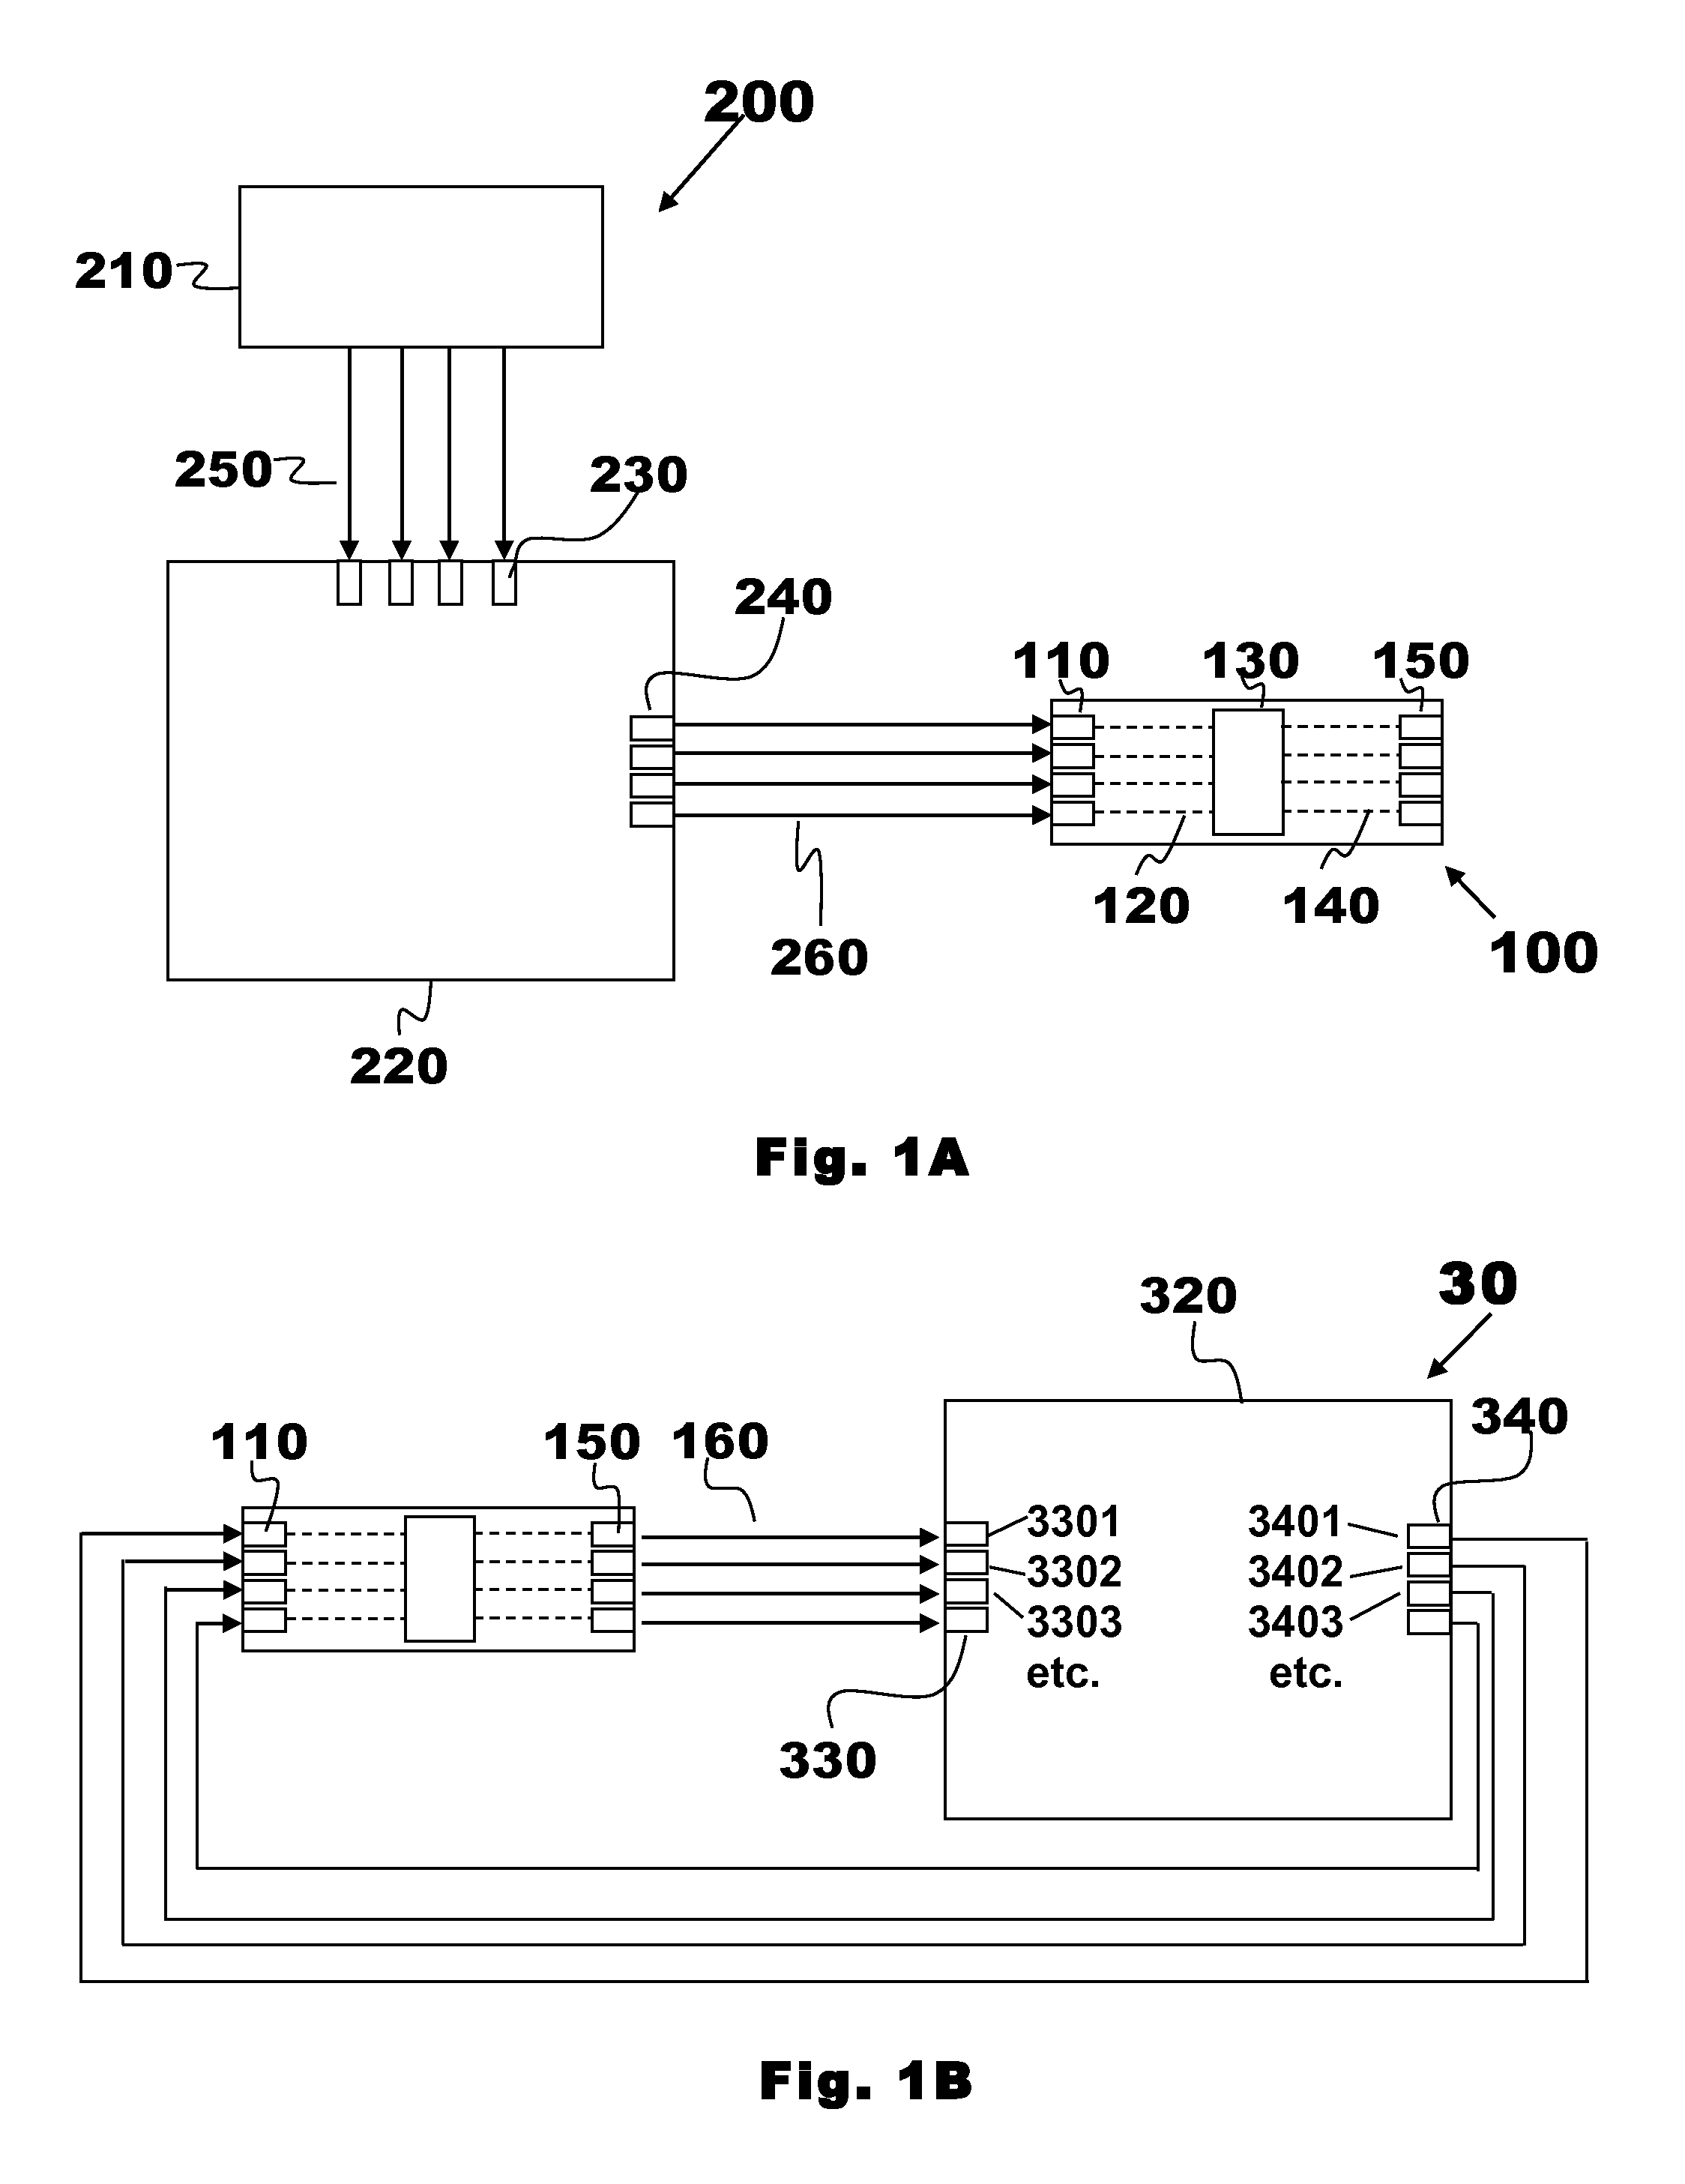 Method and system for a universal NMR/MRI console